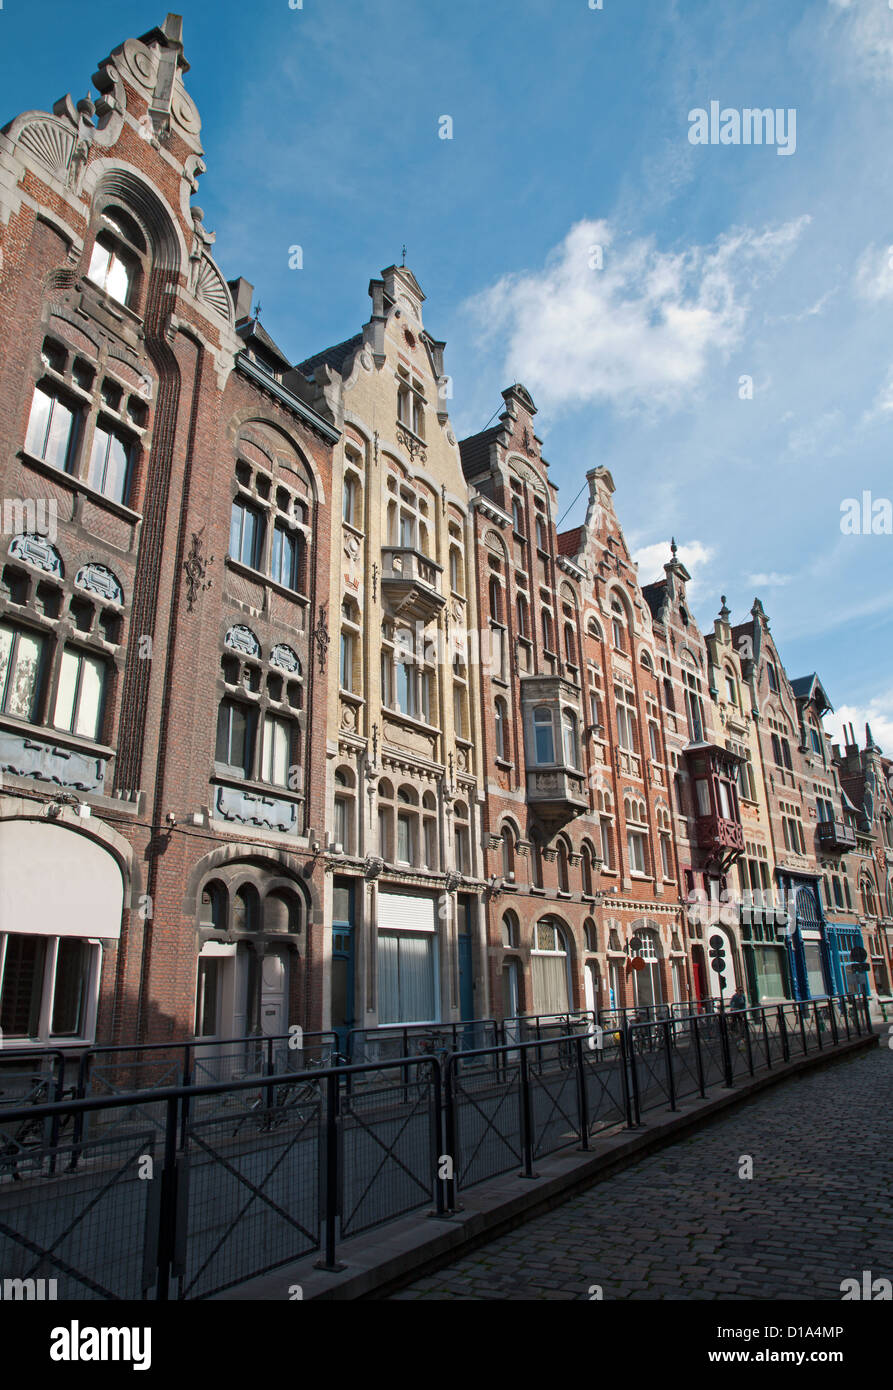 Brussels - The facade of typical houses Stock Photo